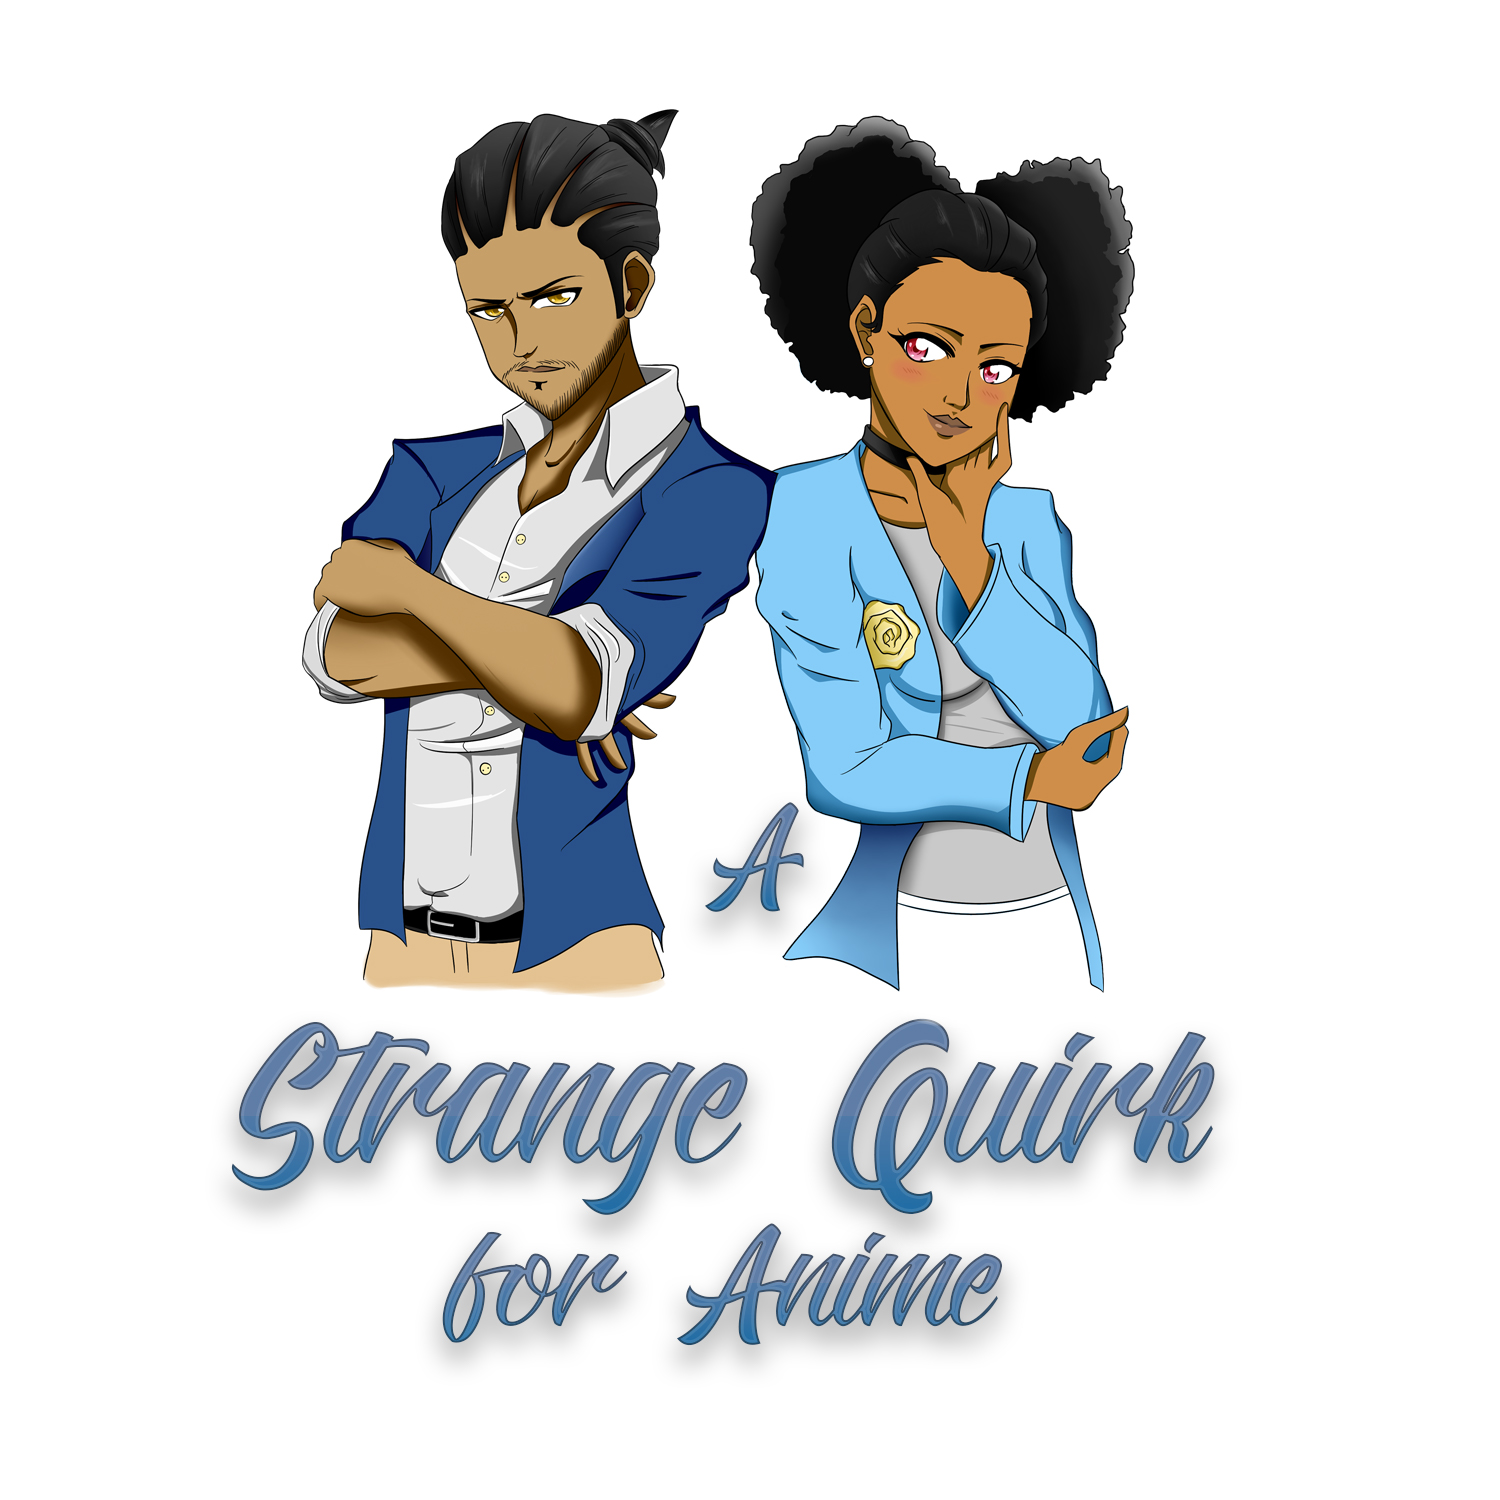 A Strange Quirk for Anime Podcast Episode 1